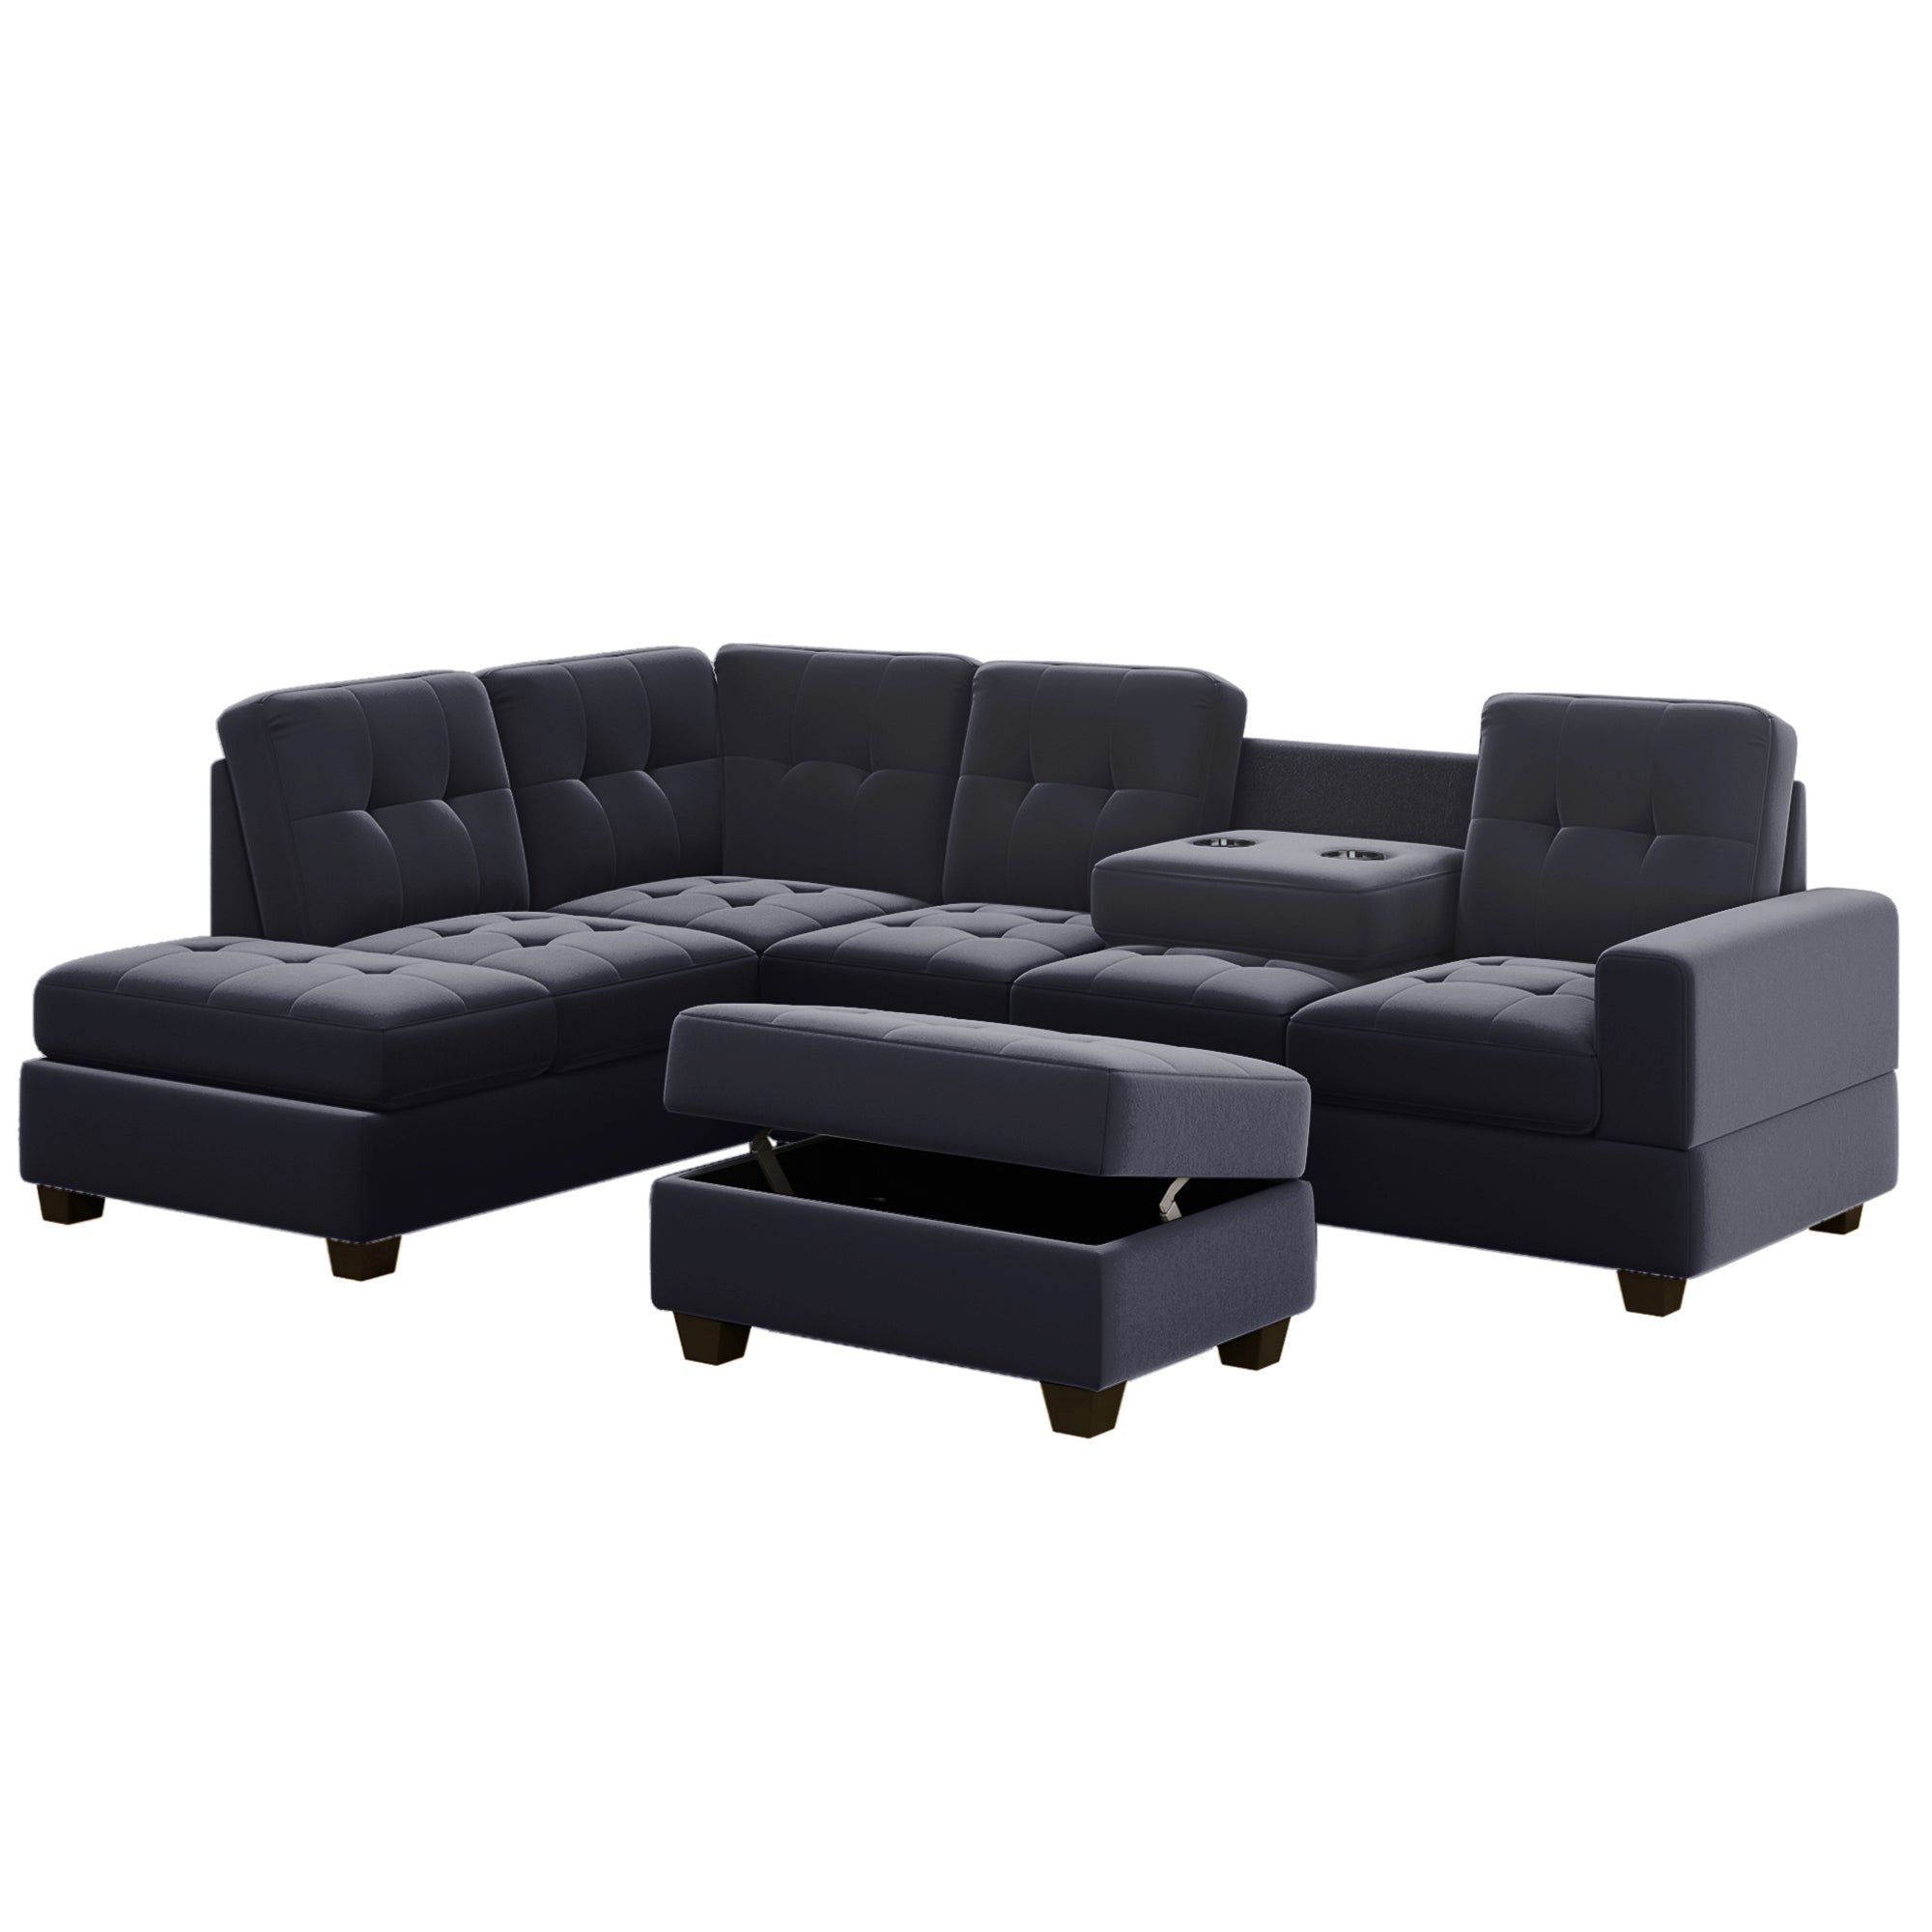 Orisfur Modern Sectional Sofa with Reversible Chaise | L-Shaped Couch Set with Storage Ottoman and Two Cup Holders | Stylish and Functional for Living Room-Stationary Sectionals-American Furniture Outlet